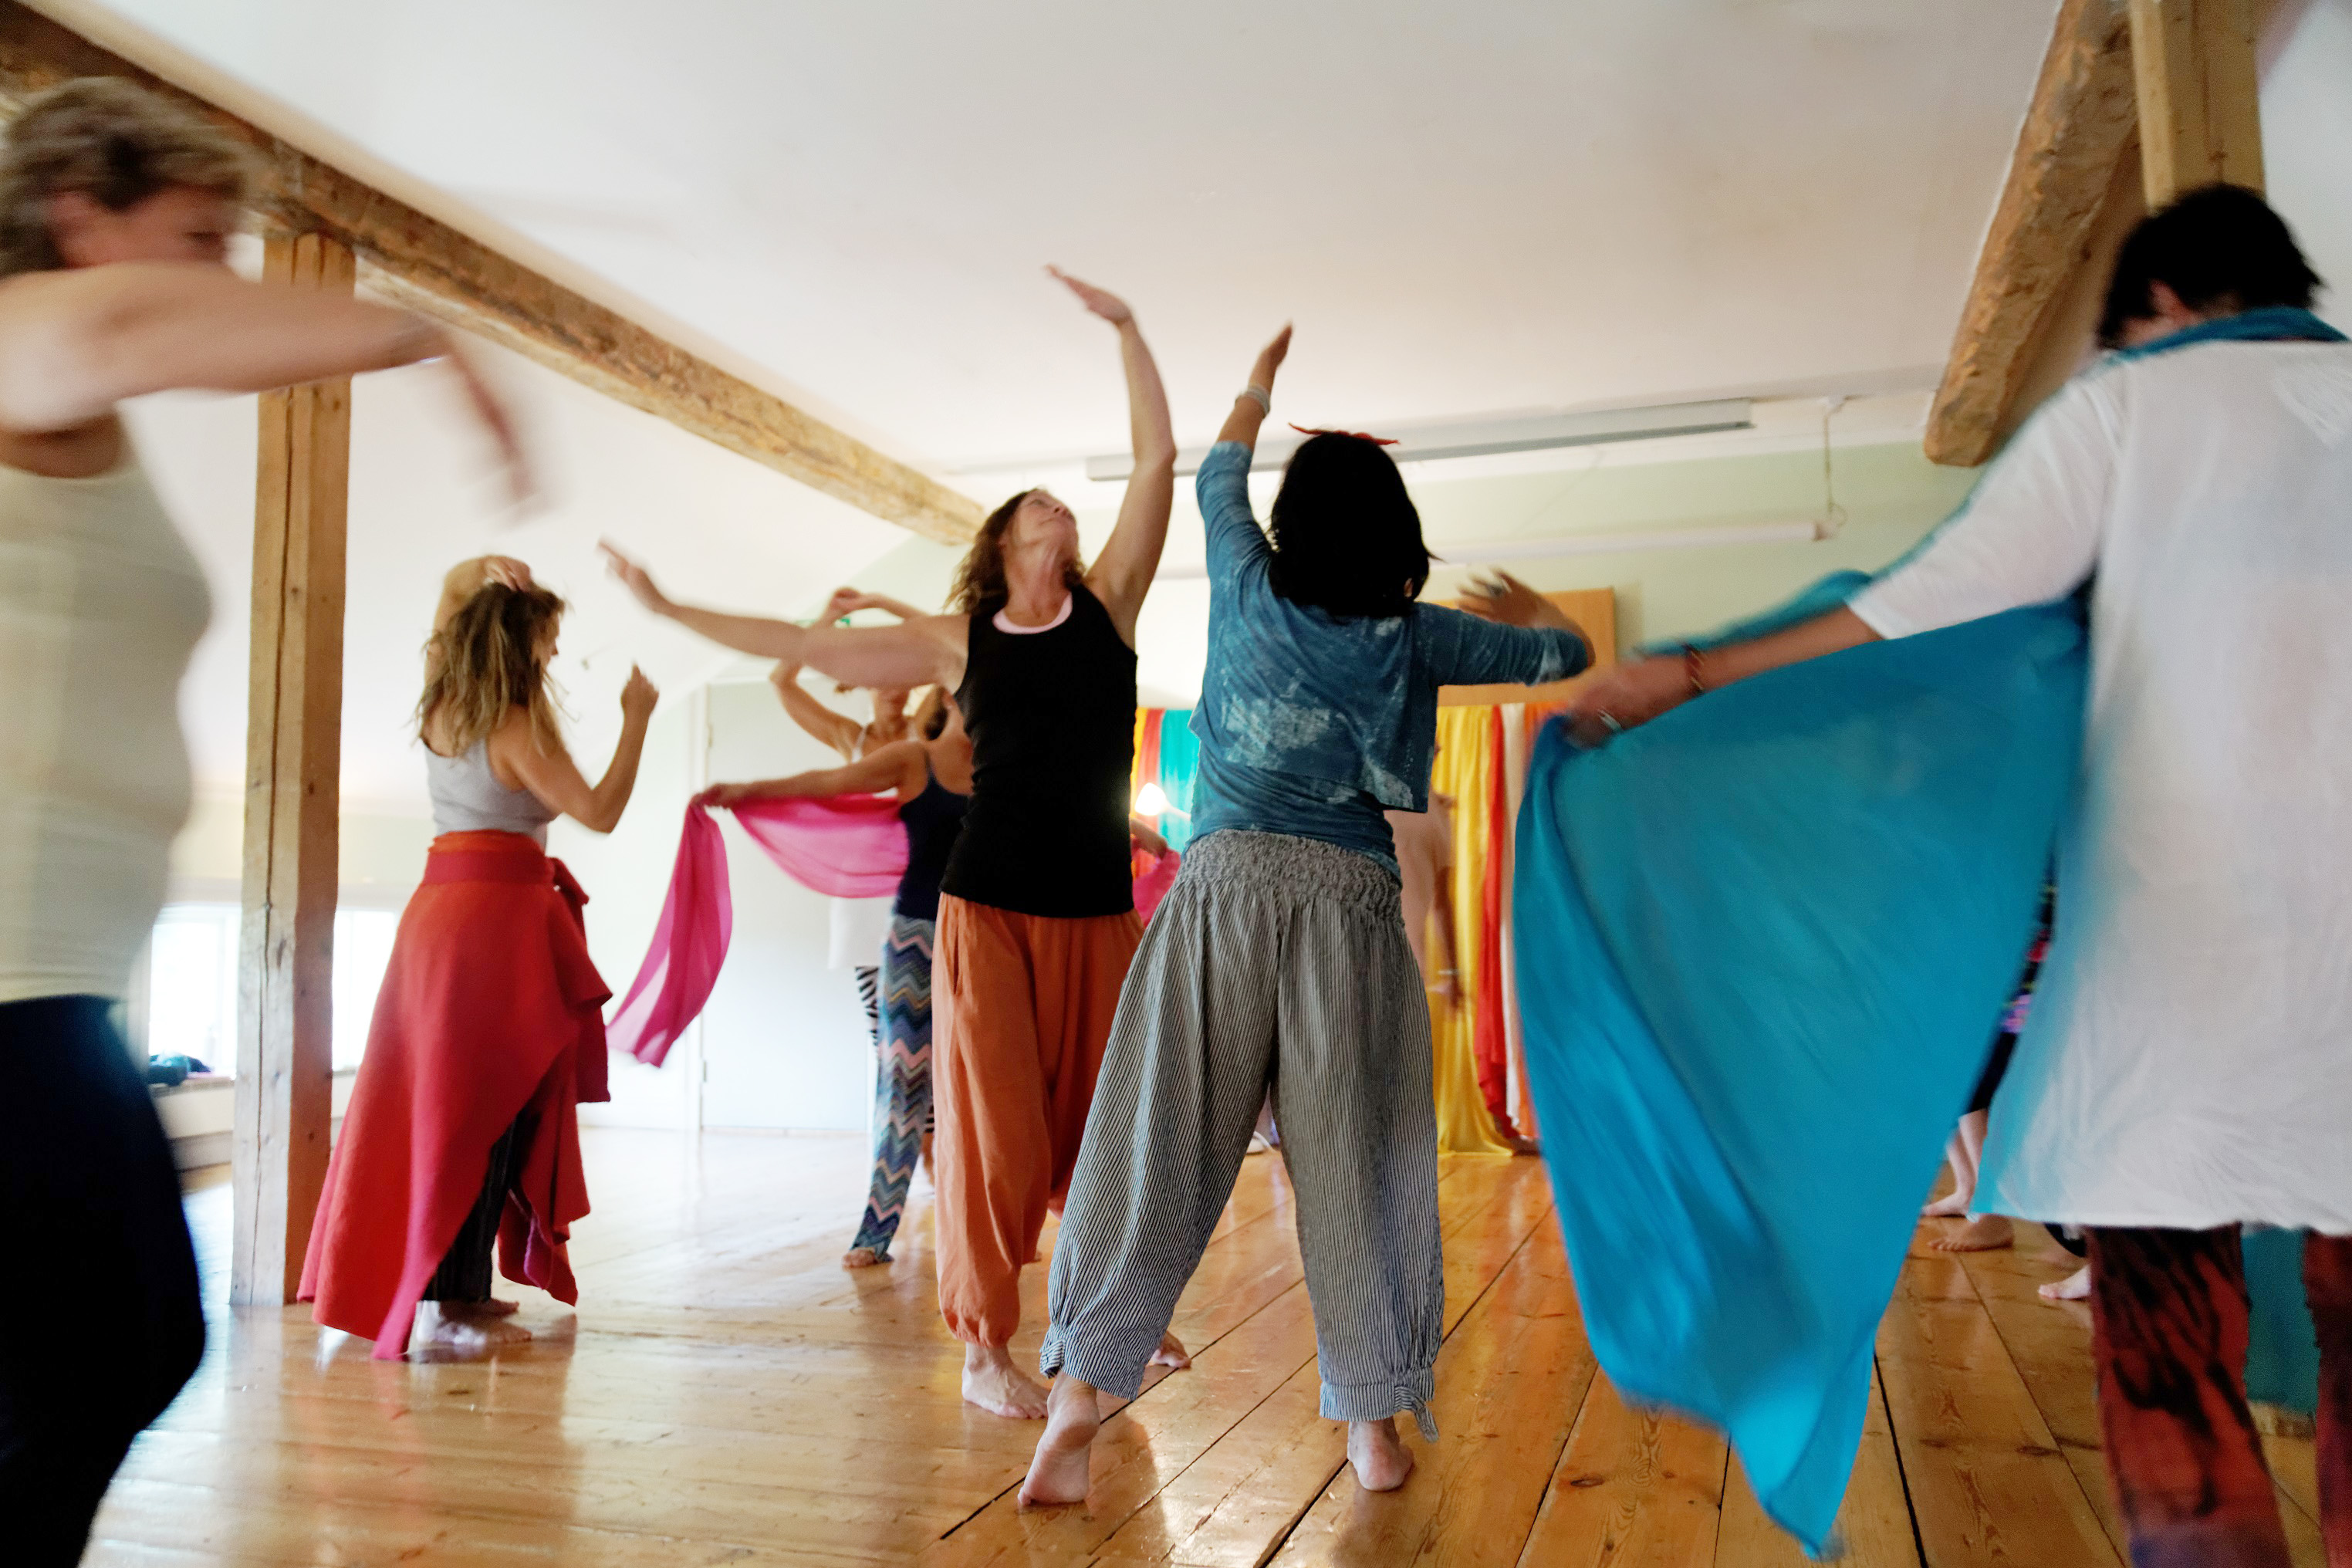 Liberating Dance in Mindfulness, your own dance